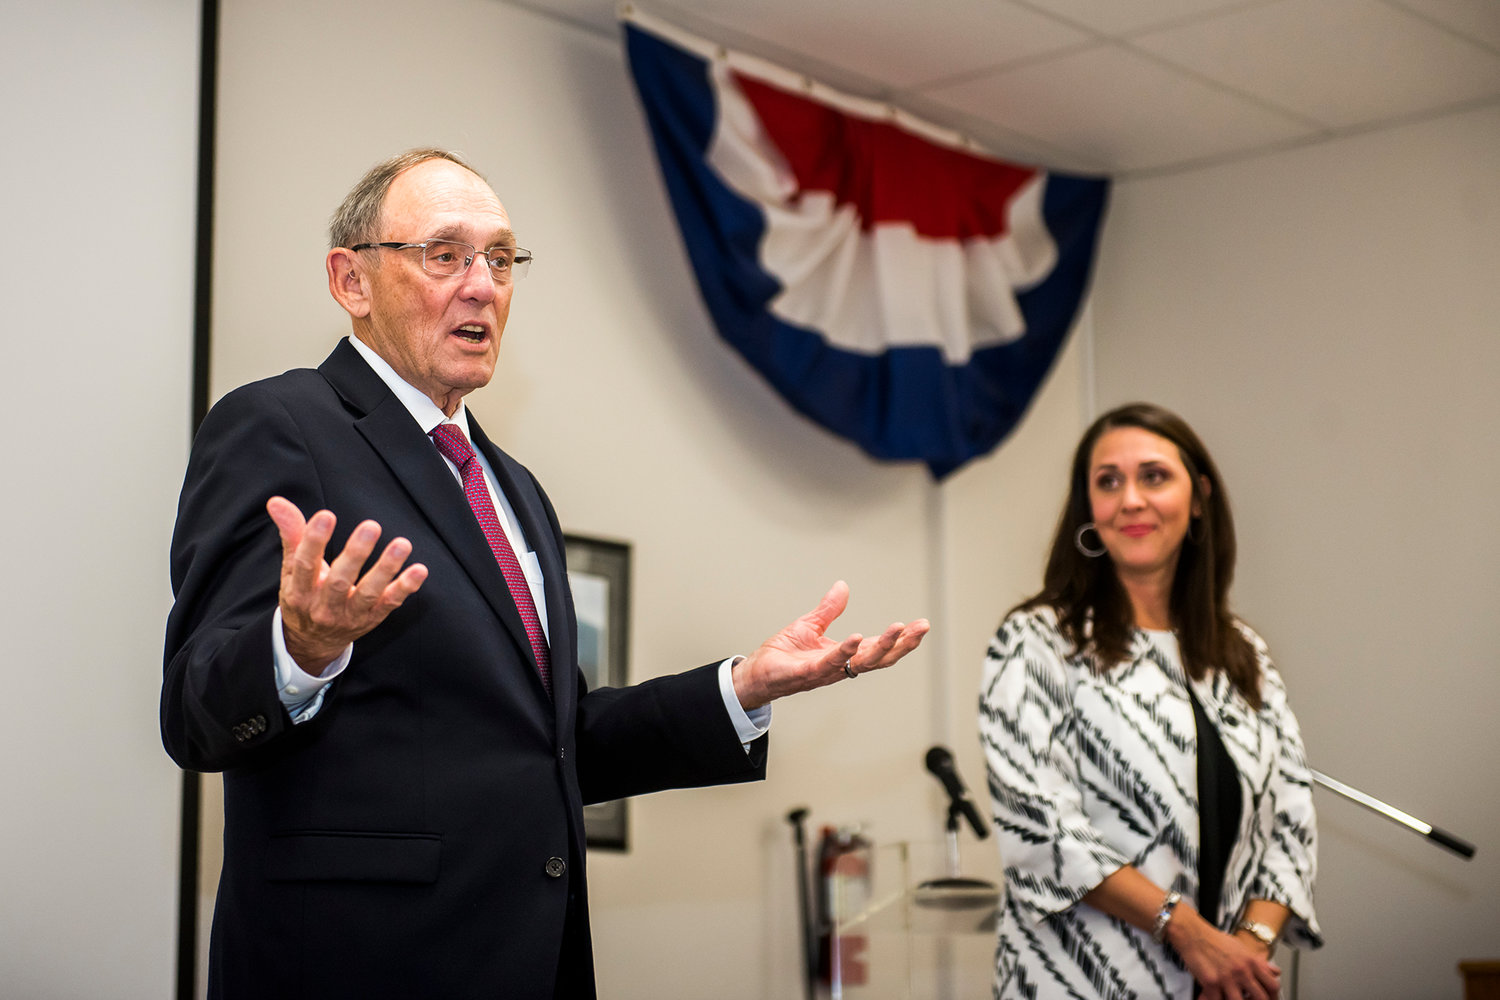 Representative Phil Roe, left, of Tennessee, and Jaime Herrera Beutler, right, talk to veterans during a public meeting Monday afternoon at the Chehalis Veterans Memorial Museum.